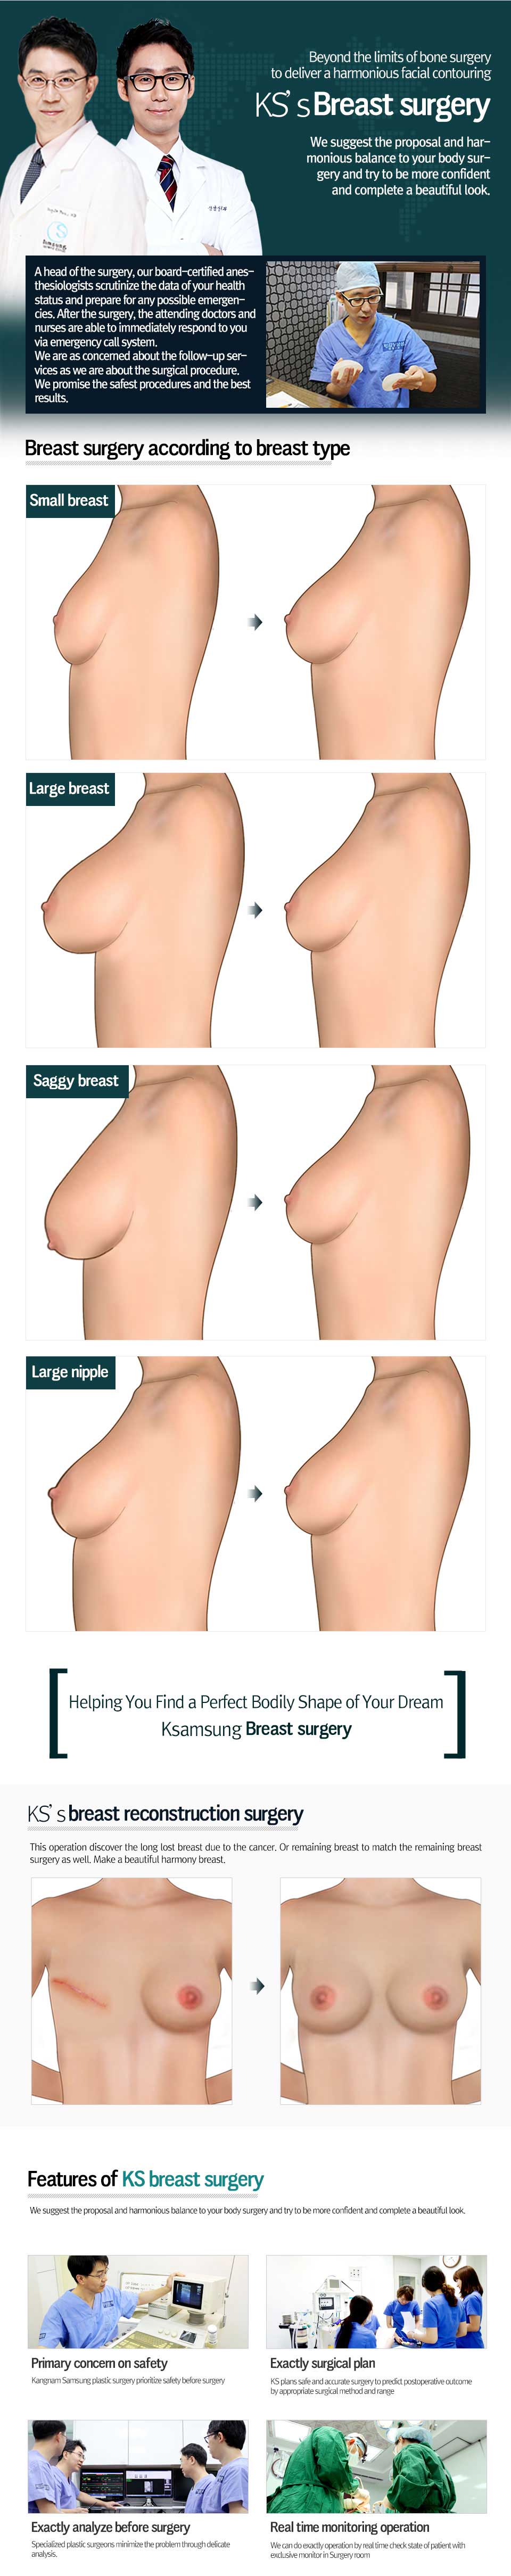 Breast Augmentation Surgery For Saggy Breasts? – Eunogo